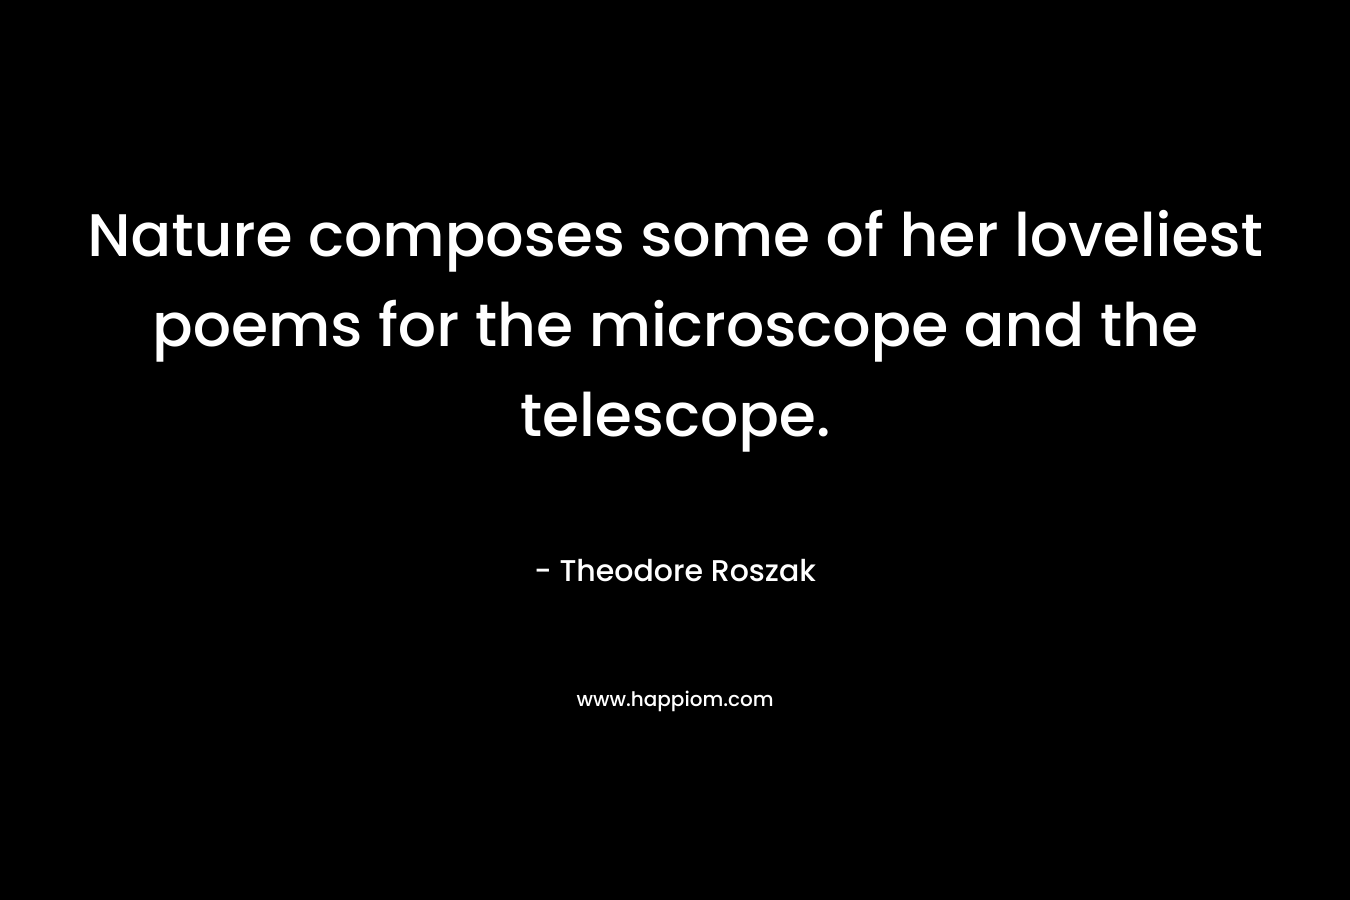 Nature composes some of her loveliest poems for the microscope and the telescope. – Theodore Roszak